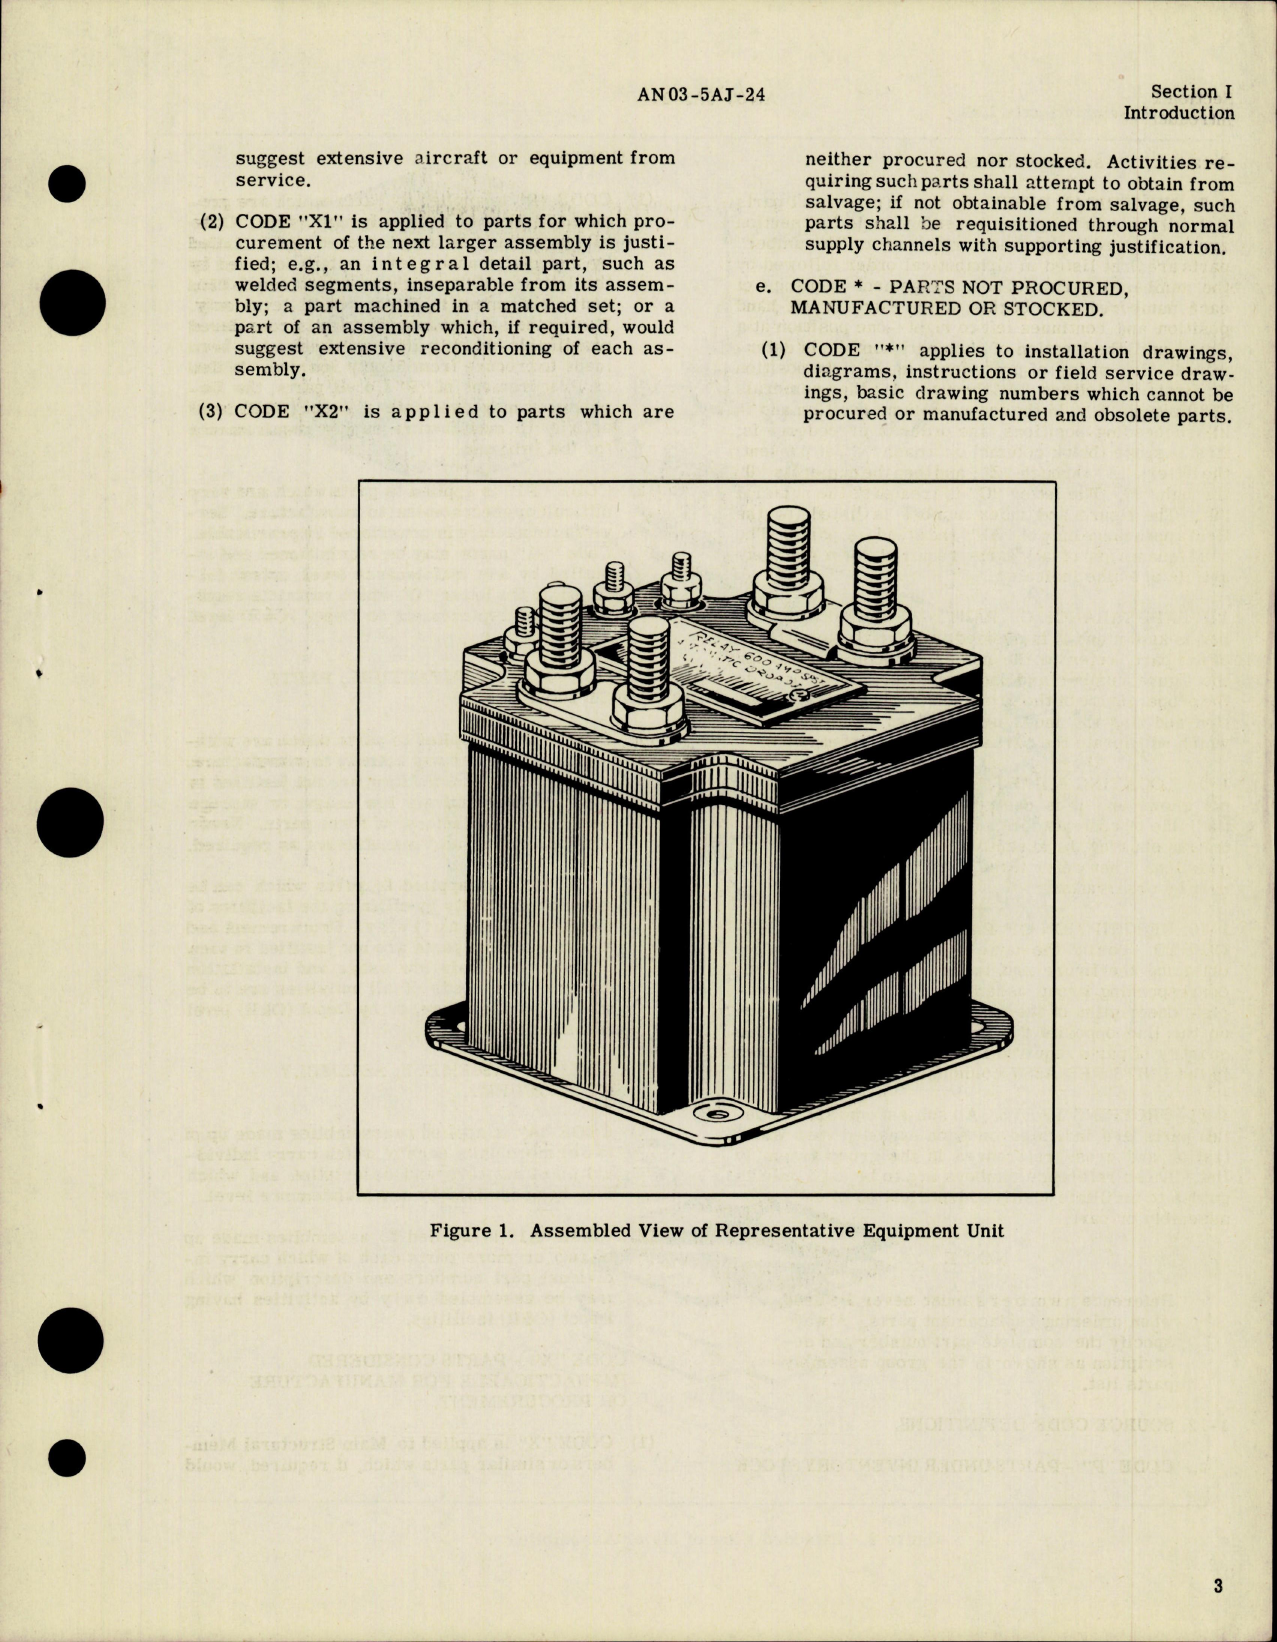 Sample page 5 from AirCorps Library document: Illustrated Parts Breakdown for Dropout Relay - Models A-711J and A-711K  - Type AN3391-2B and AN3391-2A